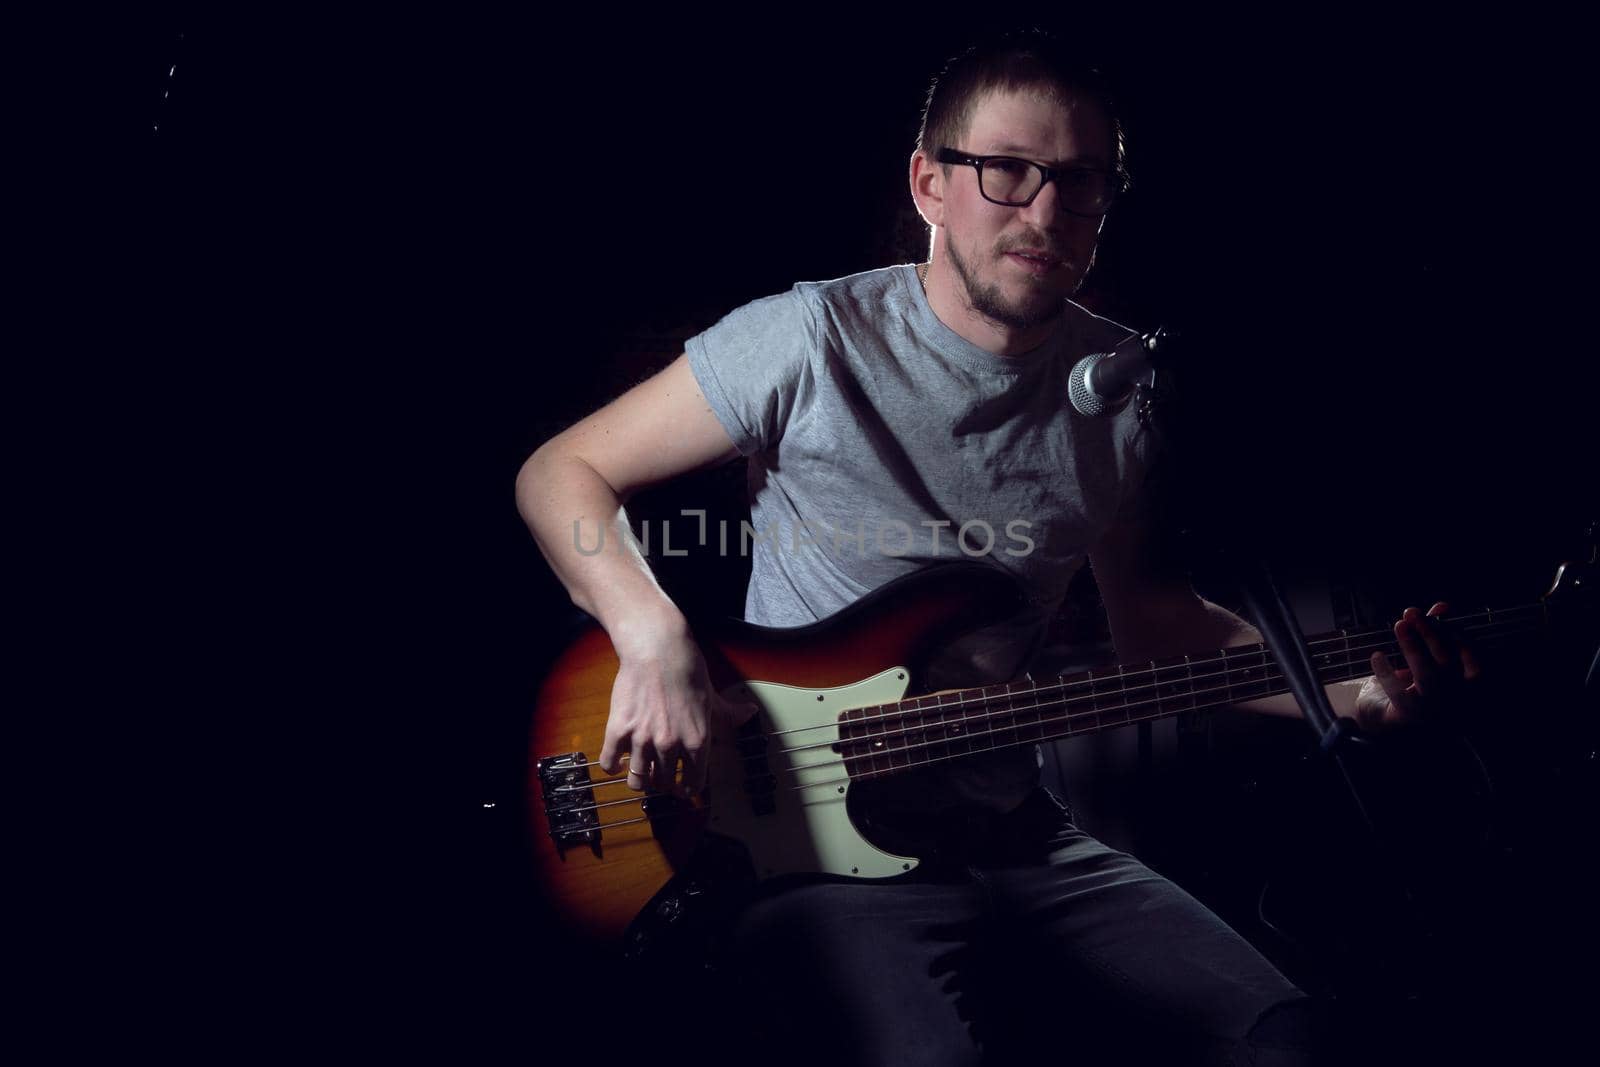 Man playing on electrical bass guitar on dark background